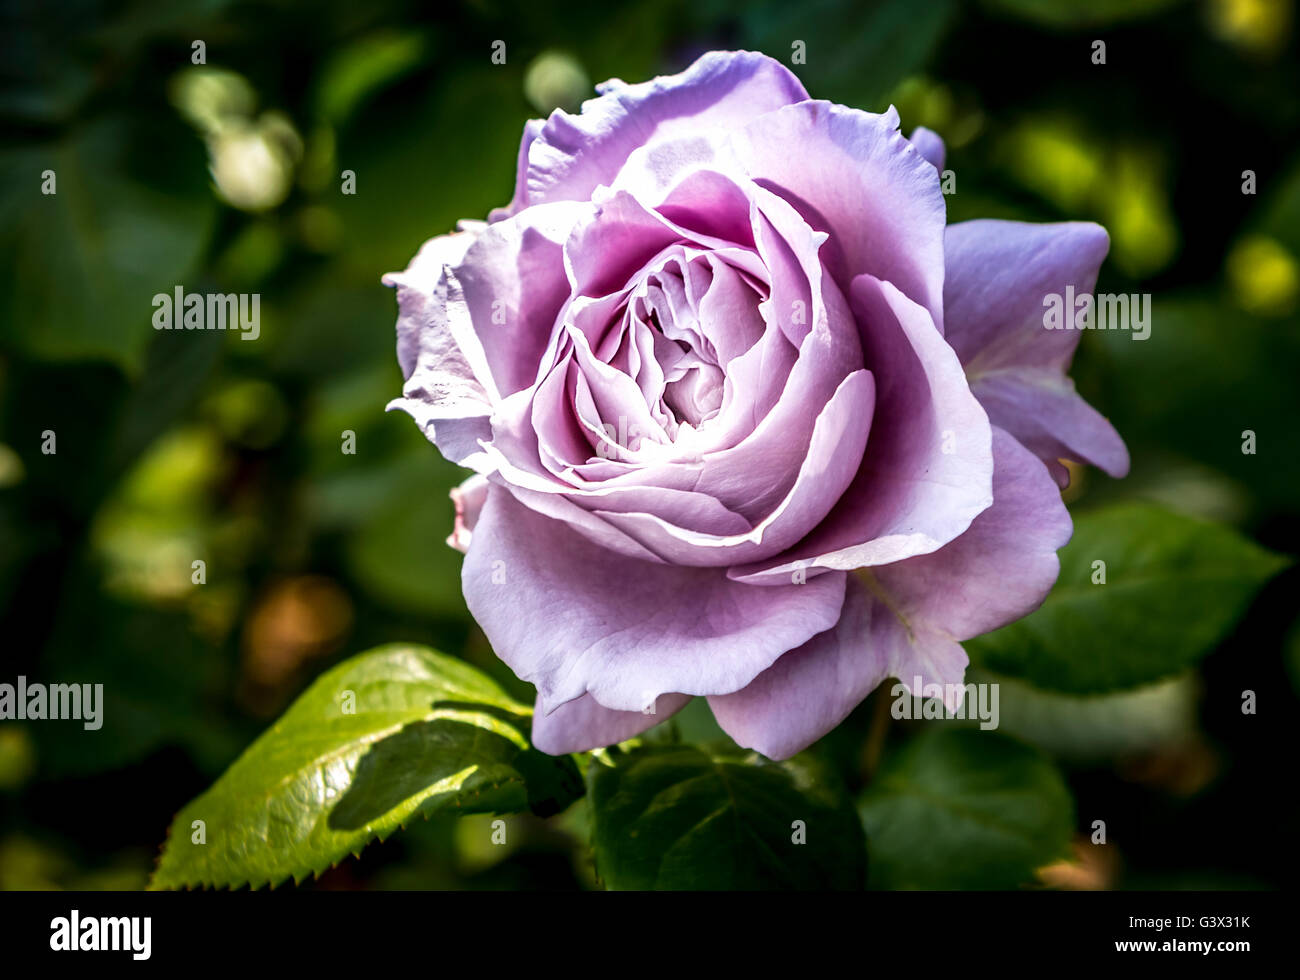 The enchanted lilac rose Stock Photo